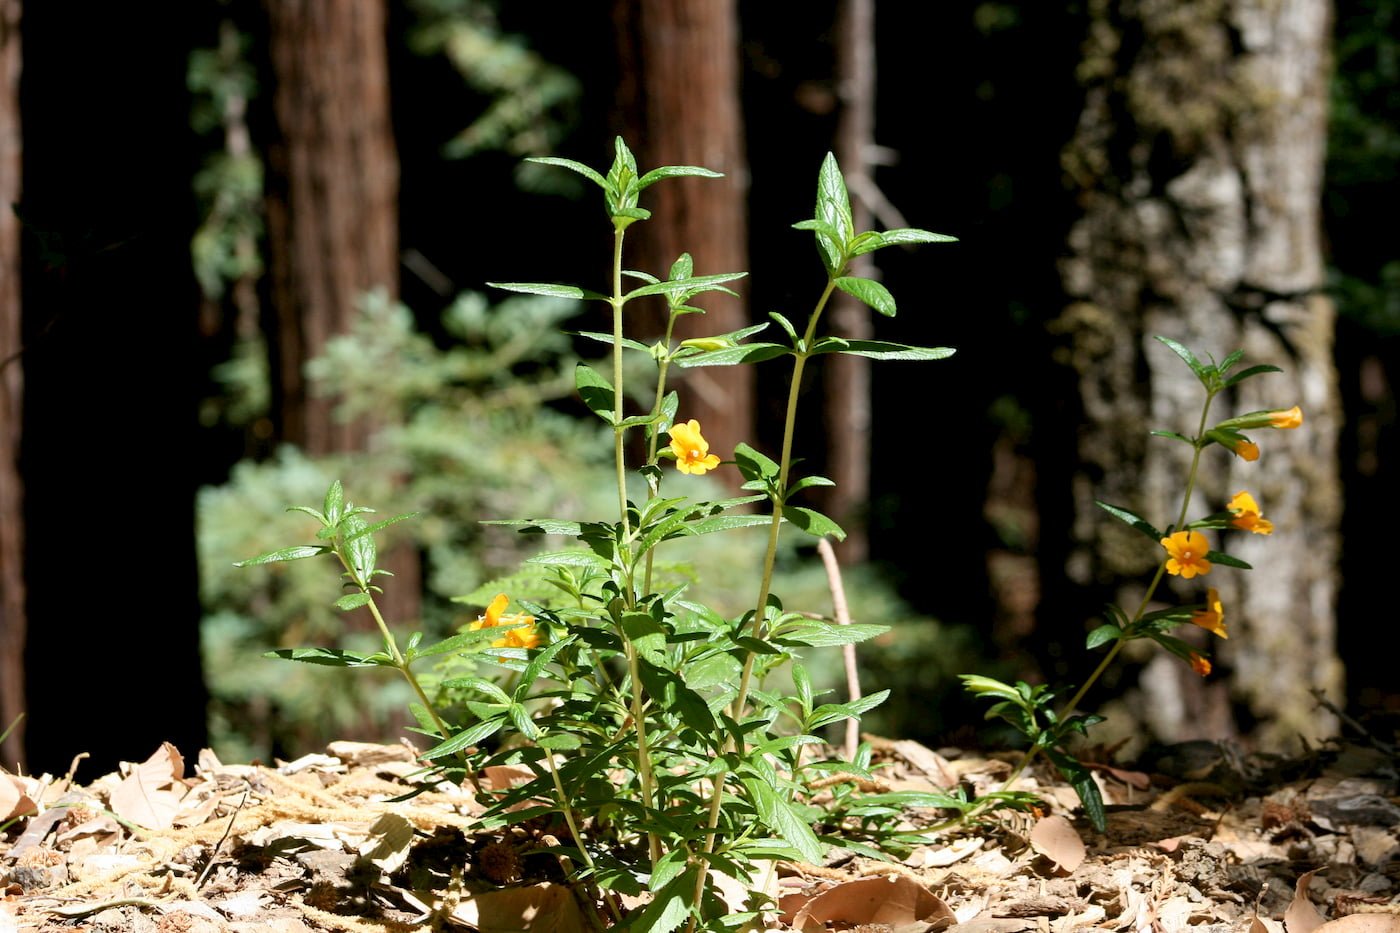 Sticky monkey flower is a wildflower found in redwood forests. Photo by Colleen Proppe